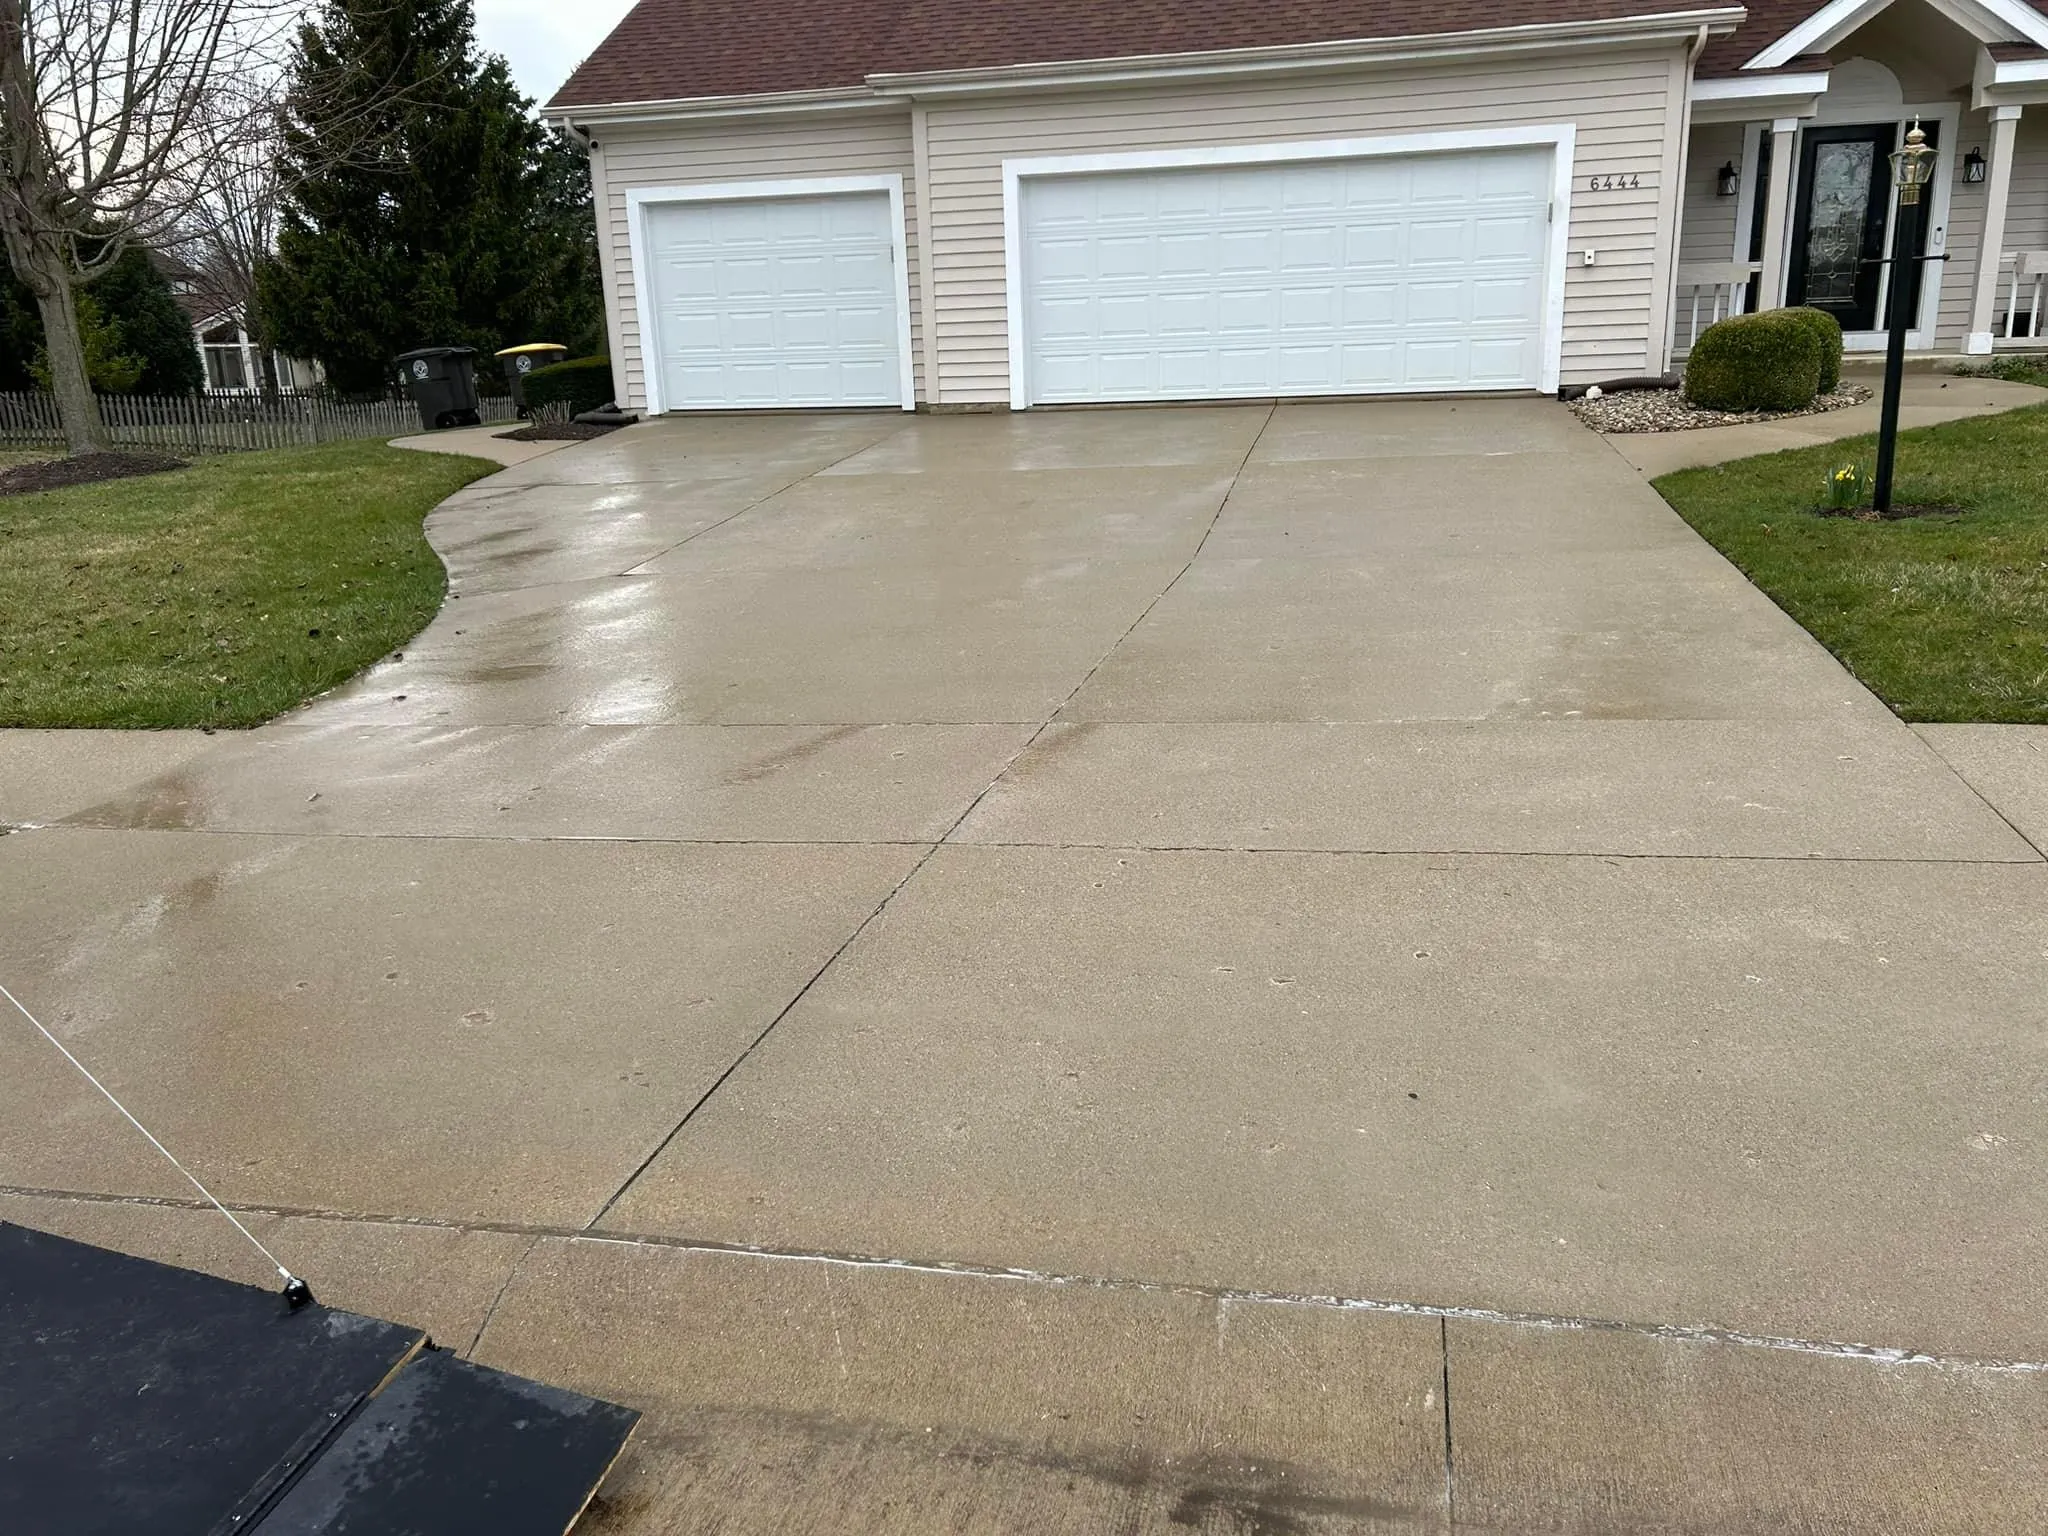 Home Softwash for Klean it Kens Pressure Washing in New Haven, IN